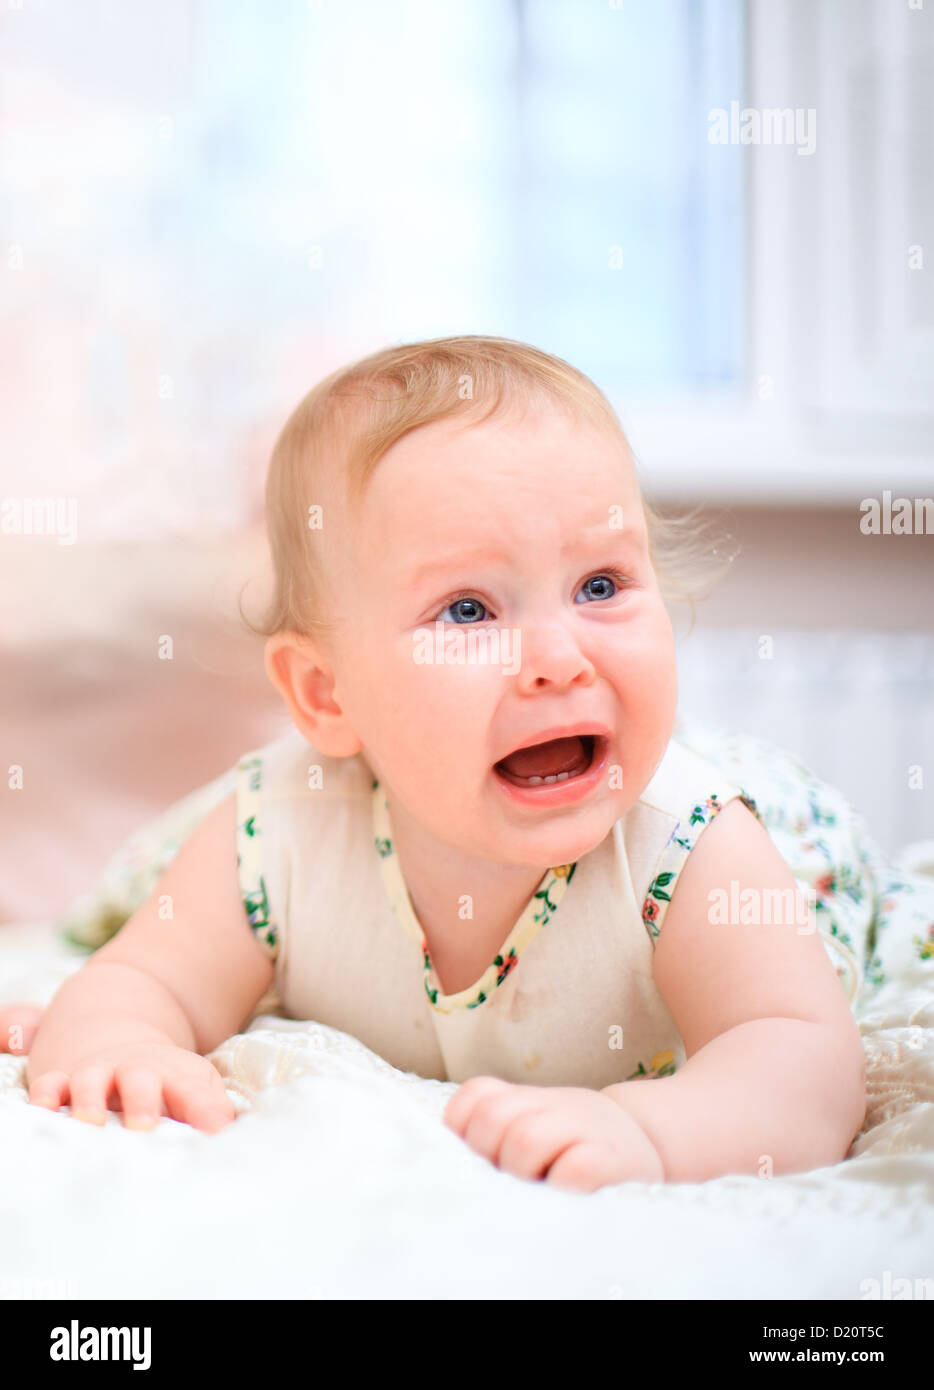 Crying baby on a light background Stock Photo